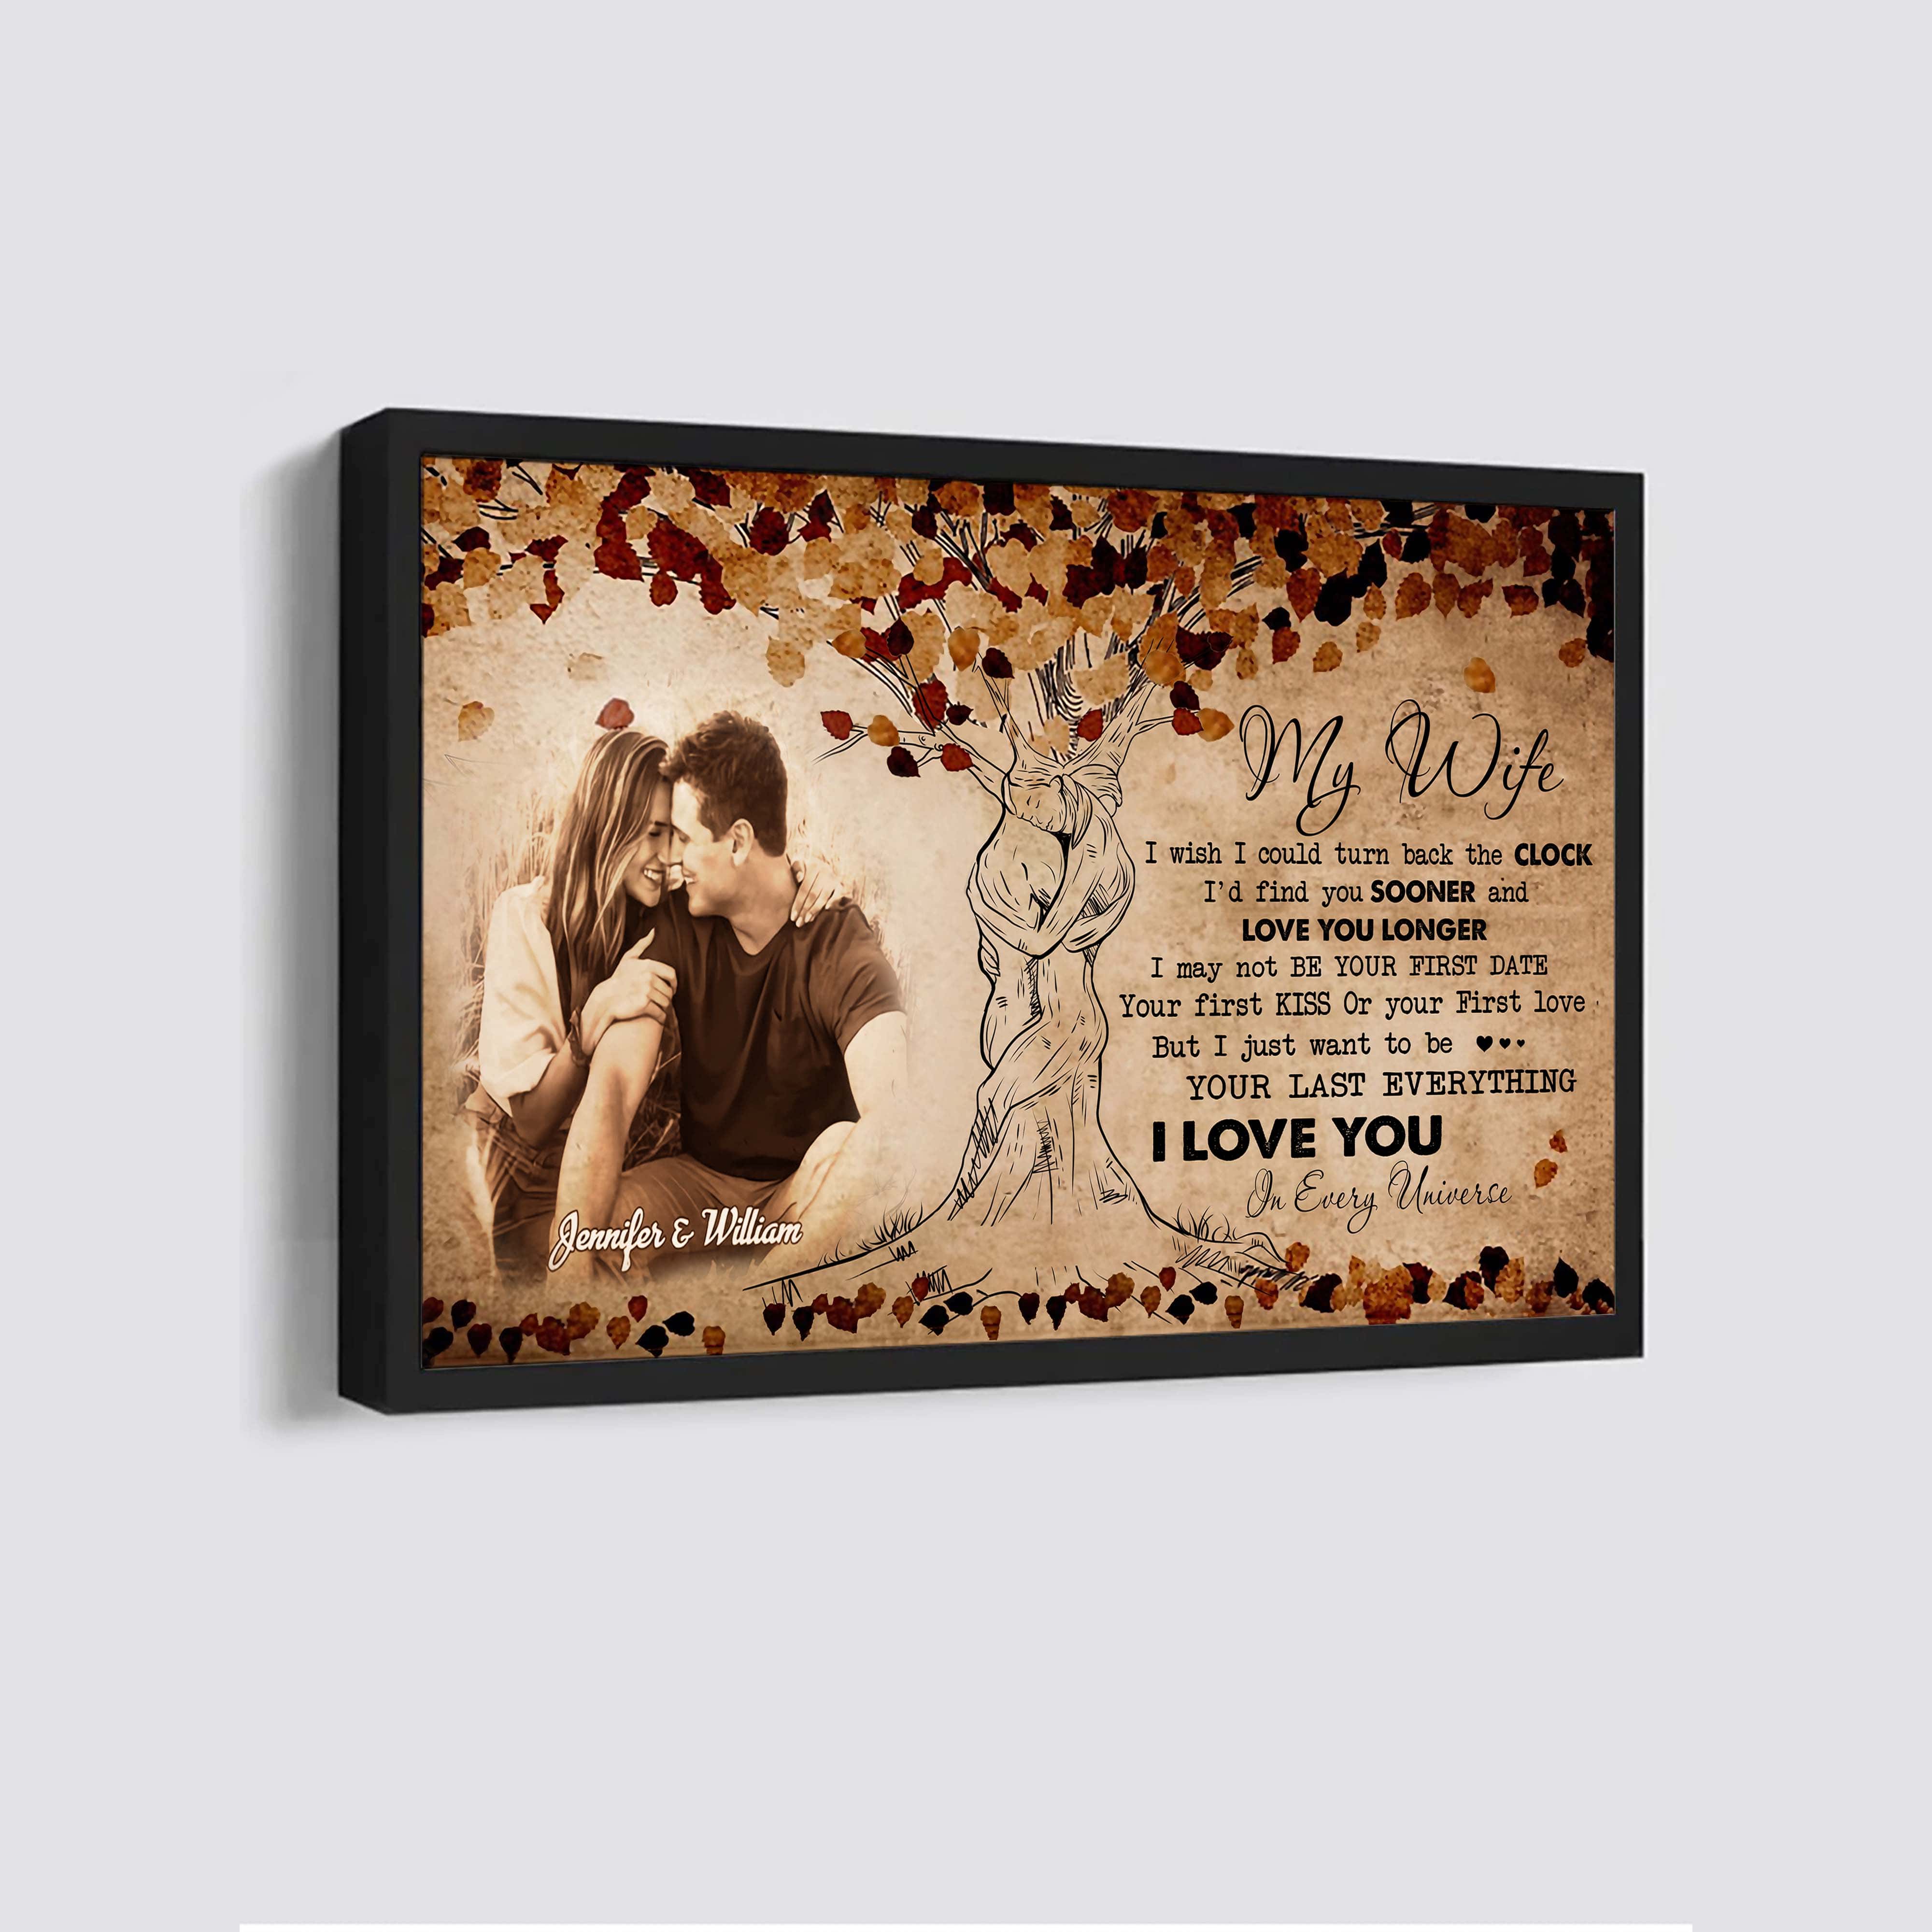 Valentines gifts-Poster canvas-Custom Image- Husband to Wife- When i say i love you more